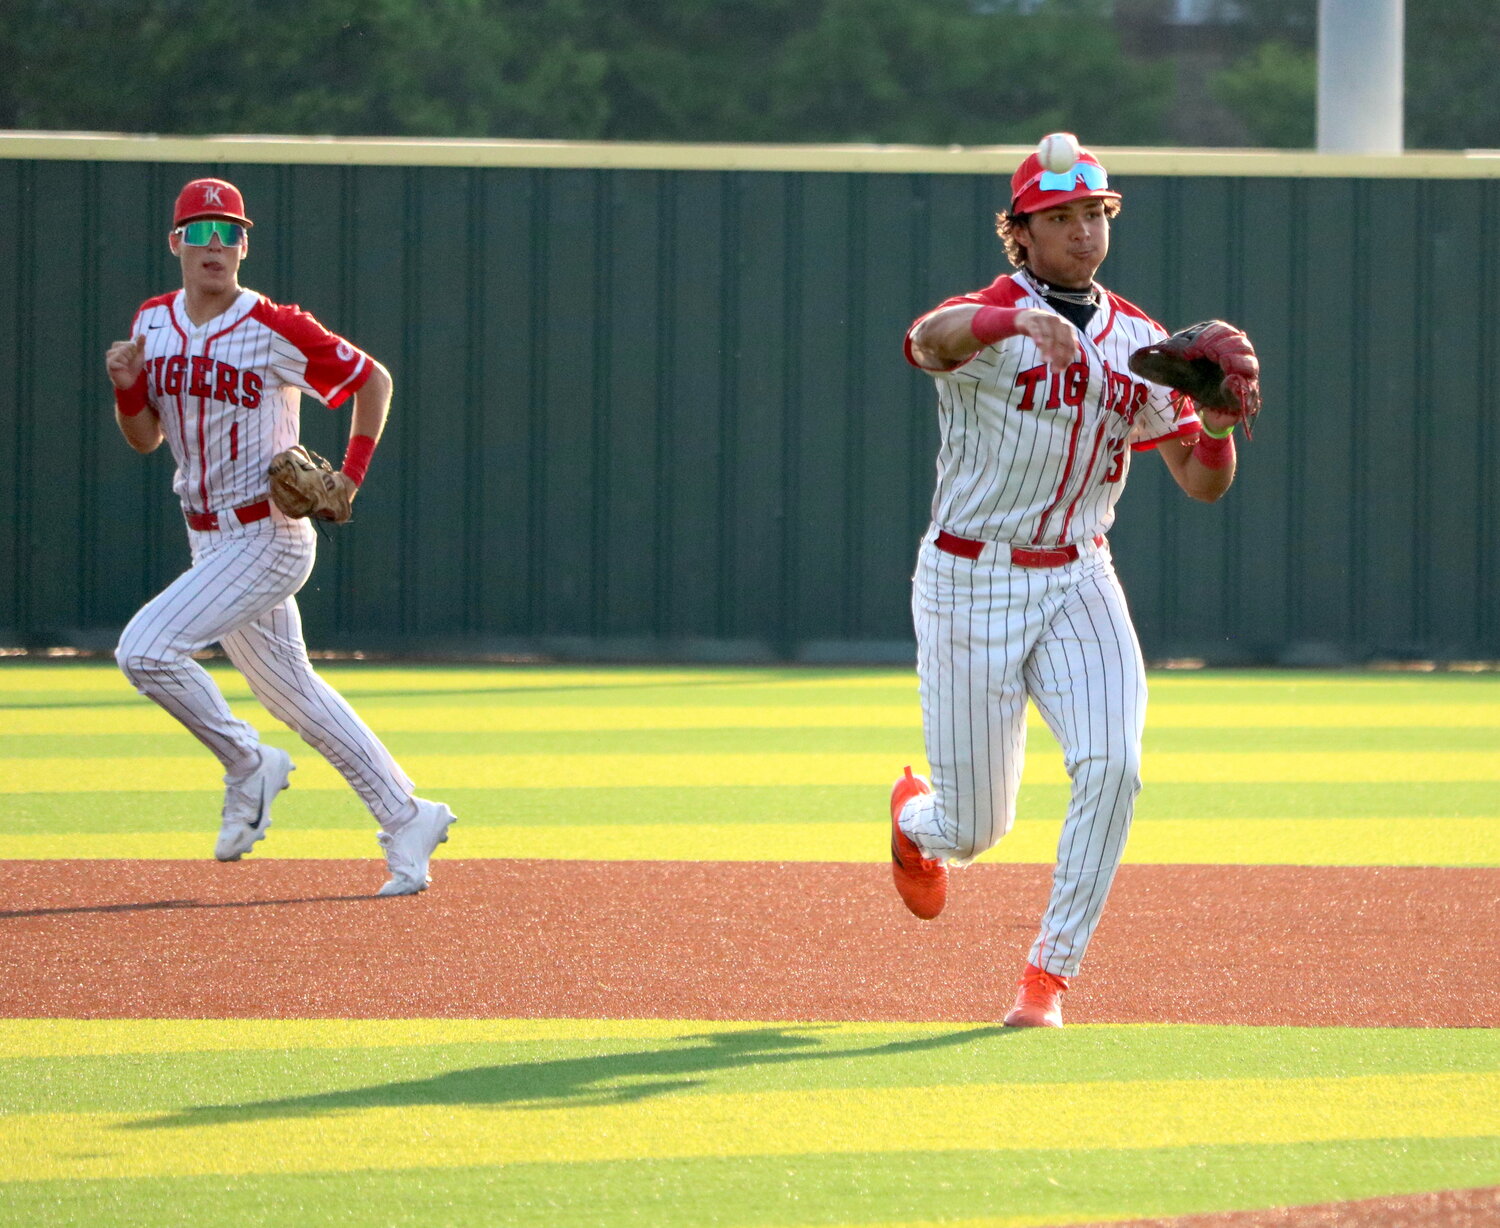 Nayden Ramirez throws to first during Thursday's Regional Semifinal between Katy and Clear Springs at Langham Creek.